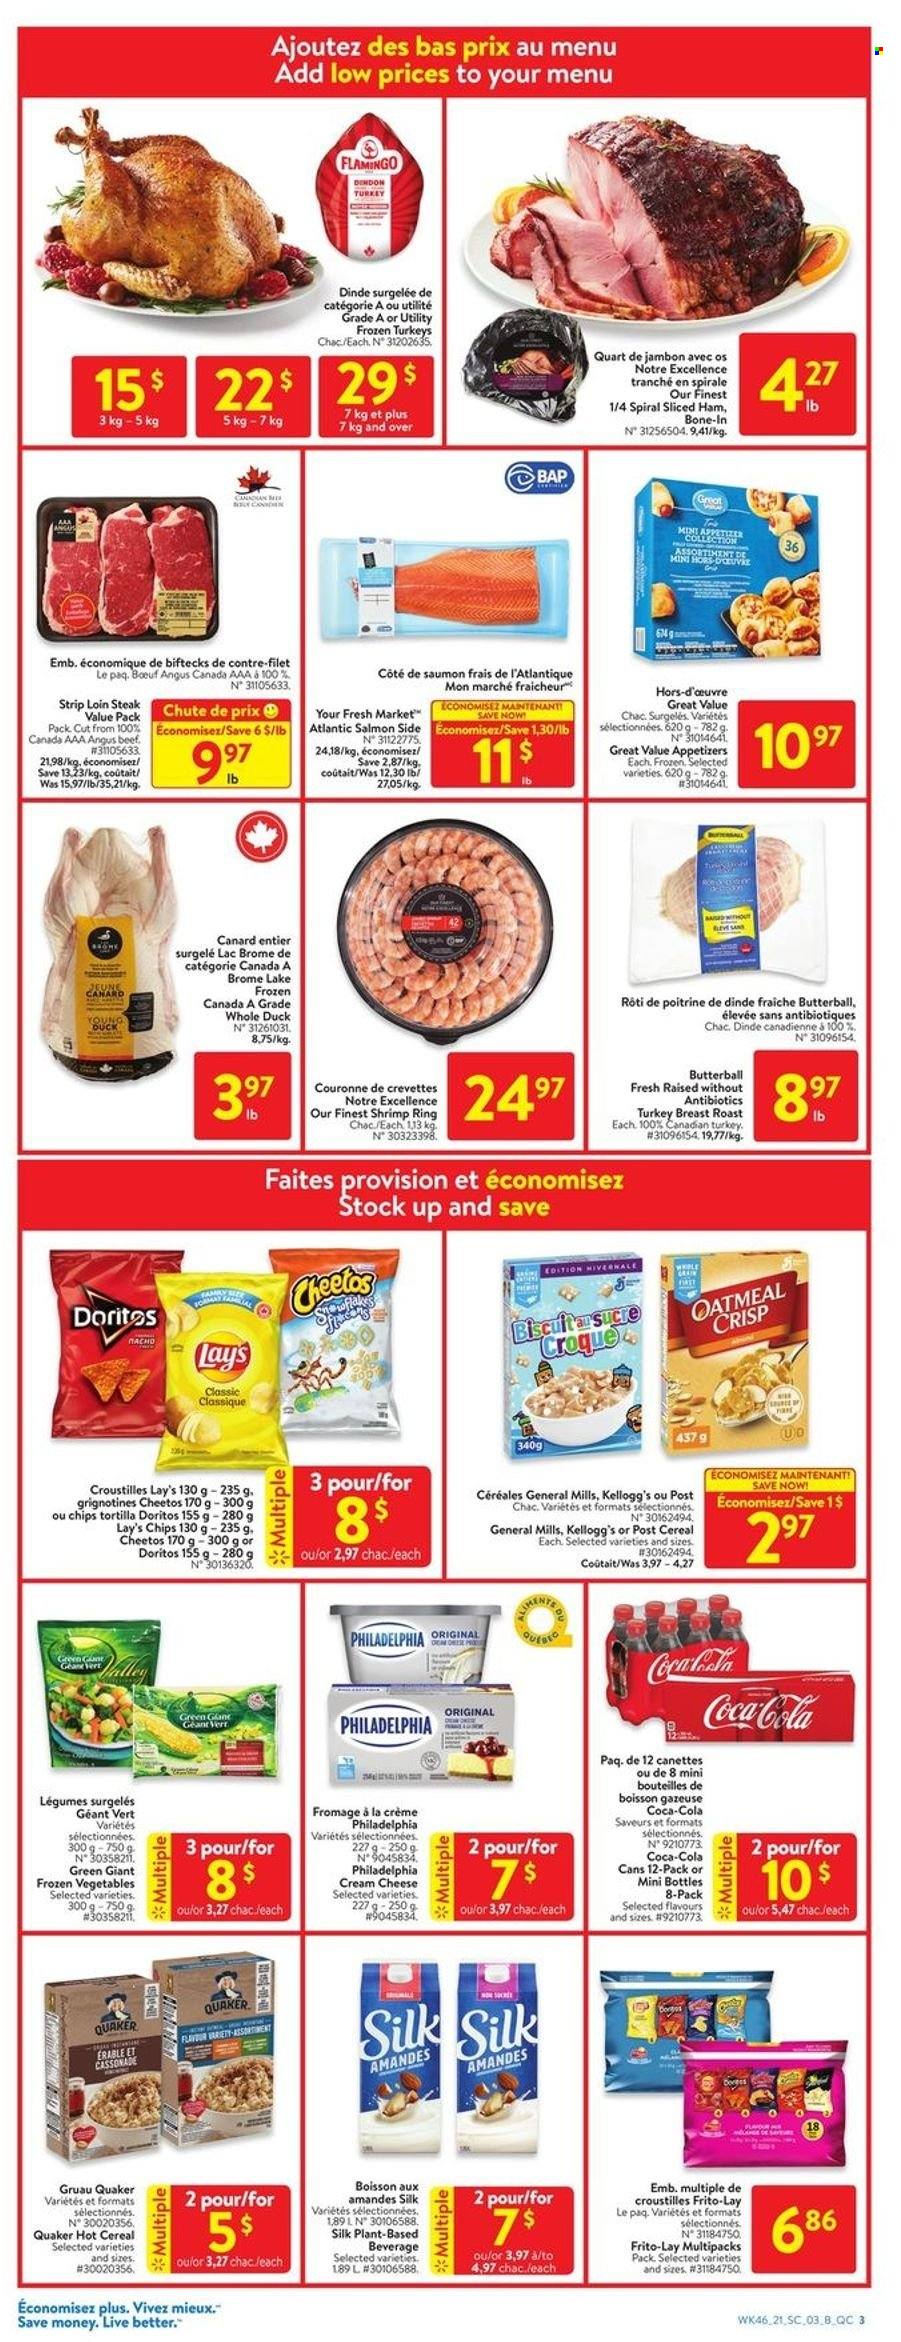 thumbnail - Walmart Flyer - December 09, 2021 - December 15, 2021 - Sales products - tortillas, salmon, shrimps, Quaker, Butterball, ham, cream cheese, cheese, Silk, frozen vegetables, Kellogg's, Doritos, Cheetos, Lay’s, Frito-Lay, oatmeal, cereals, Coca-Cola, turkey breast, turkey, duck meat, whole duck, beef meat, Philadelphia, steak. Page 3.